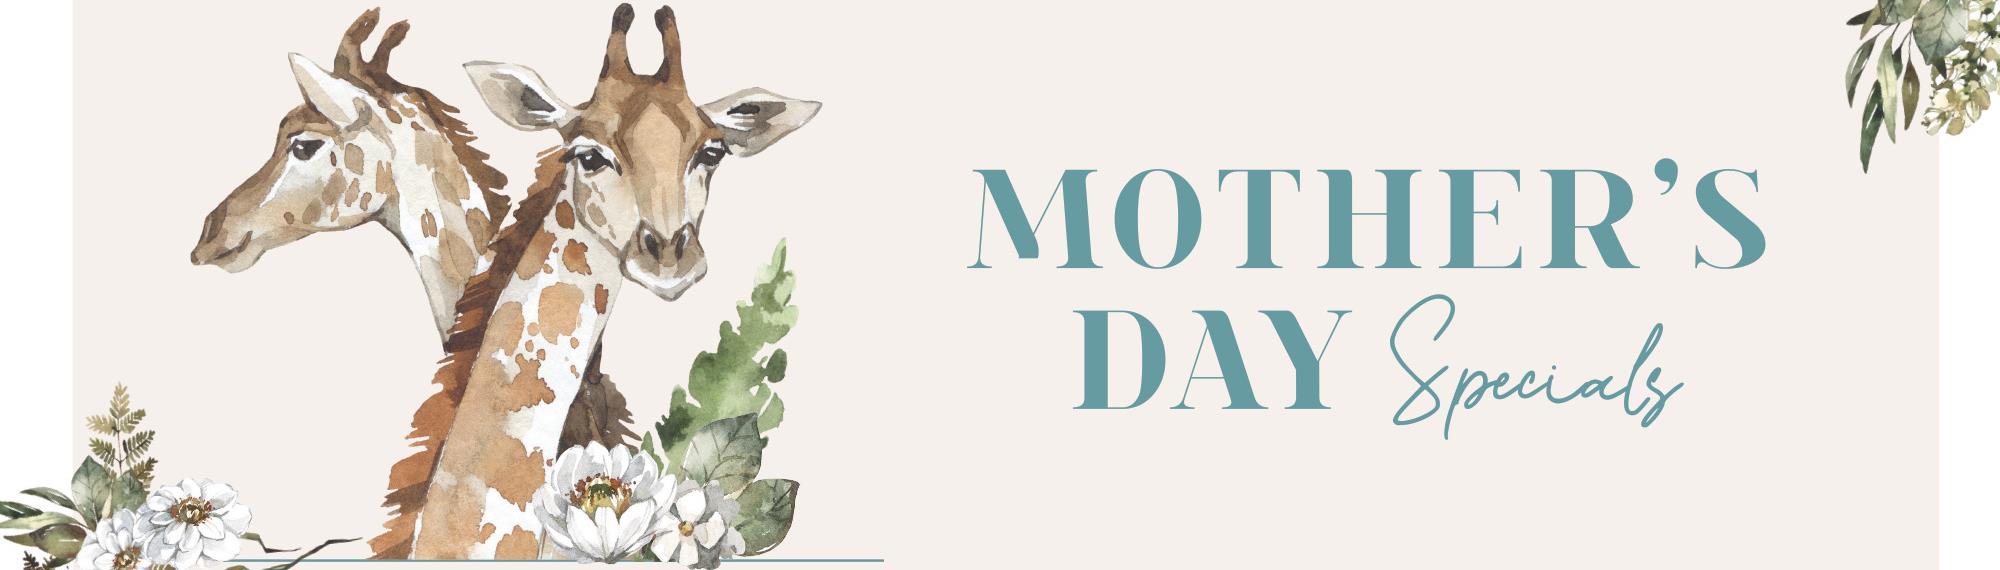 Illustration of two giraffes and flowers and a text of Mother's Day specials.